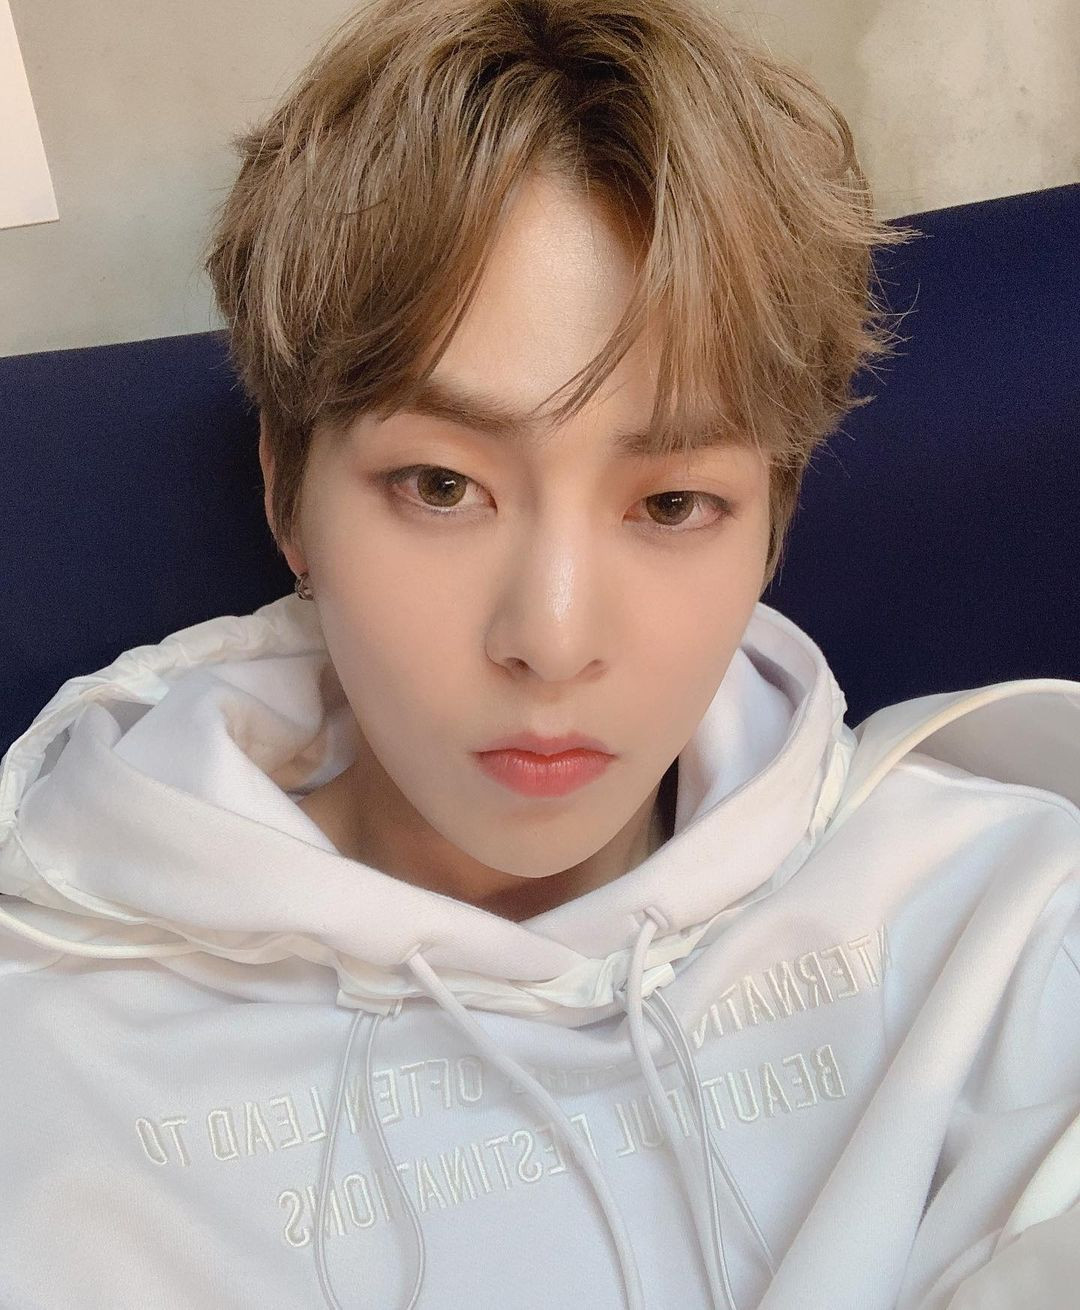 EXO Xiumin Tests Positive for COVID-19, EXO Member Currently in Self-Isolation